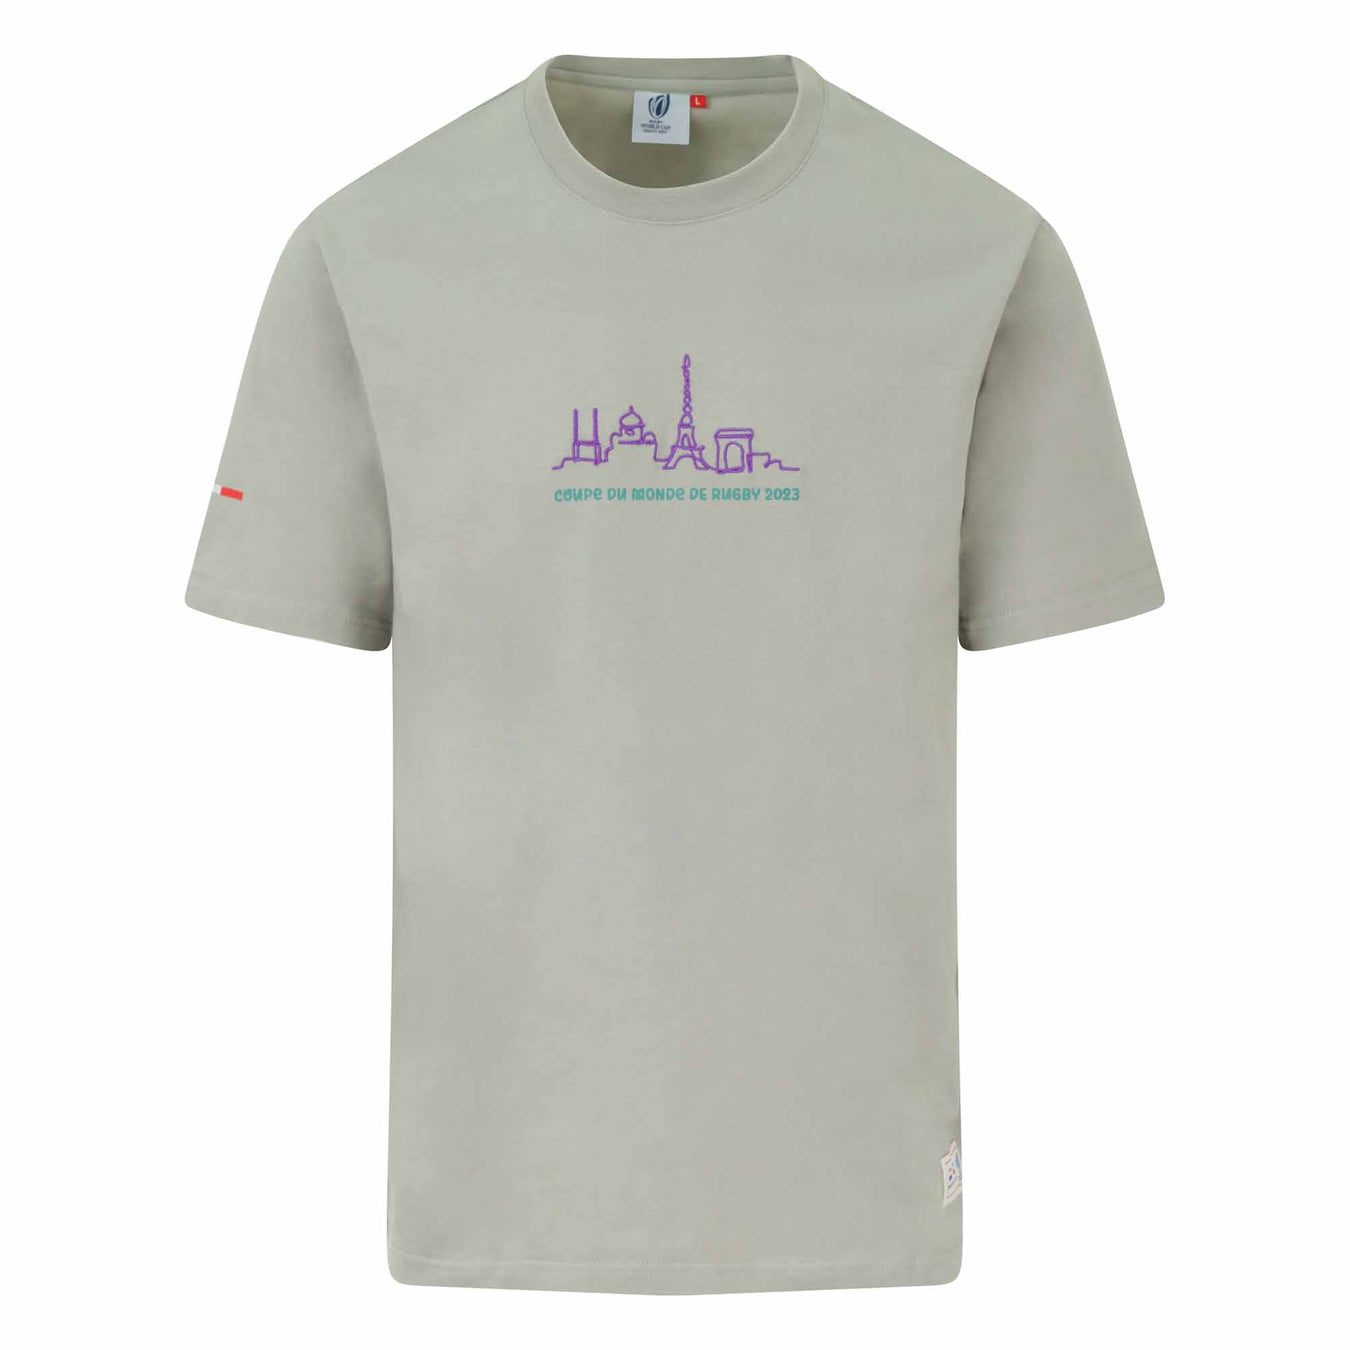 Cityscape S/S T-shirt - Green Haze |T-Shirt | RWC Lifestyle | Absolute Rugby